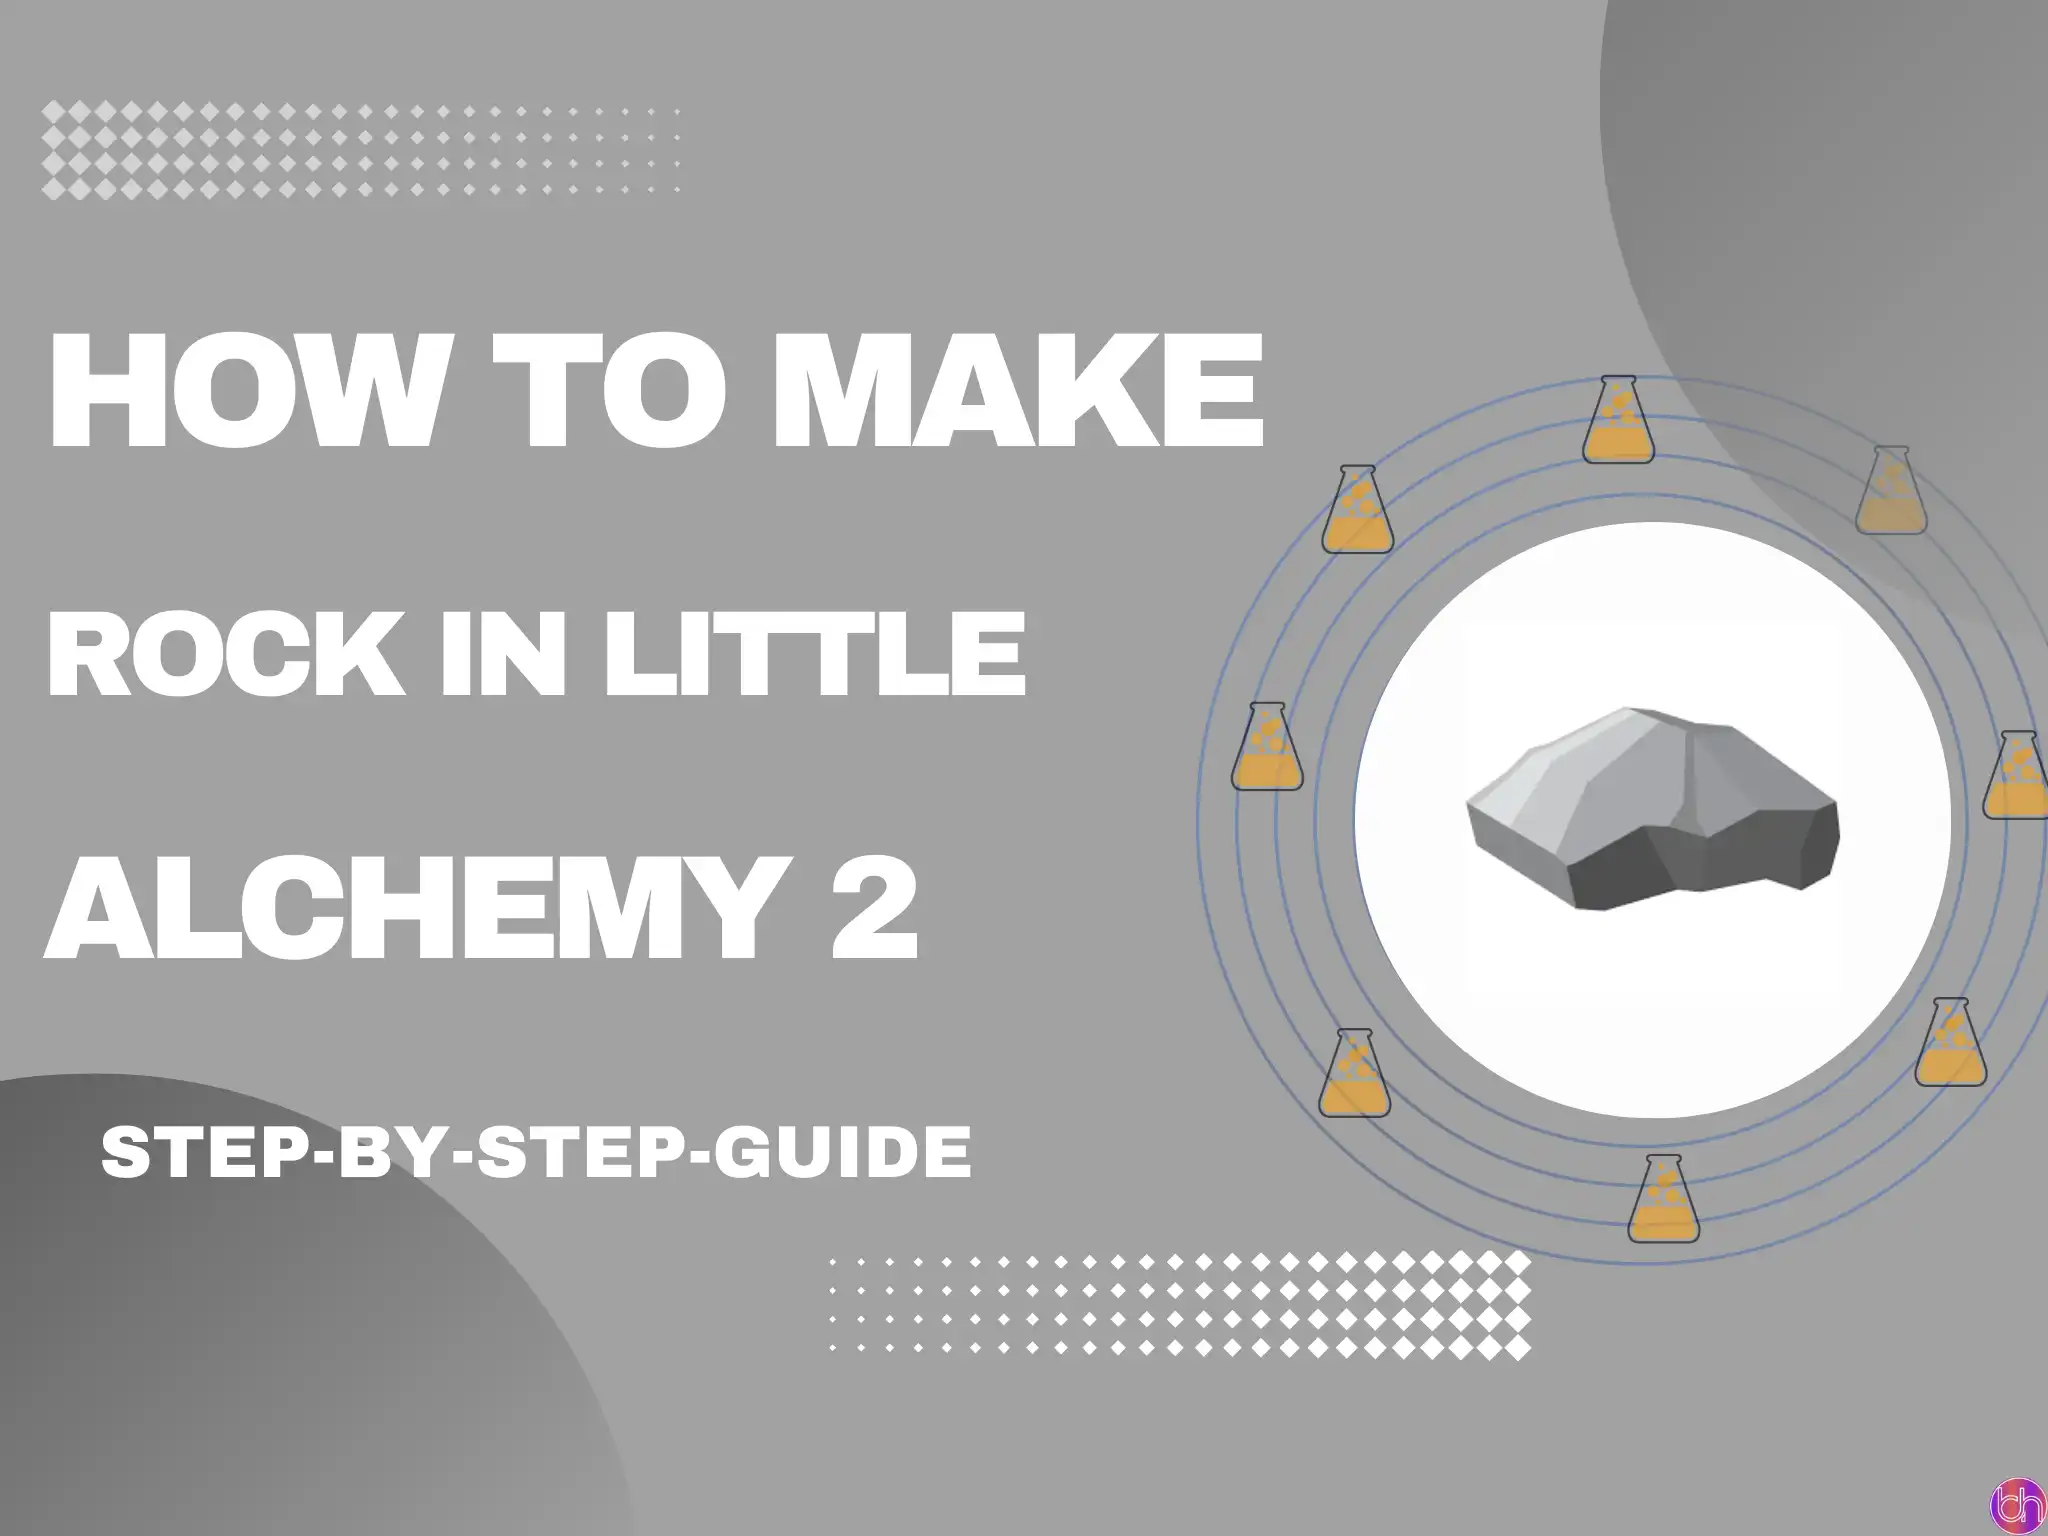 How to make Rock in Little Alchemy 2